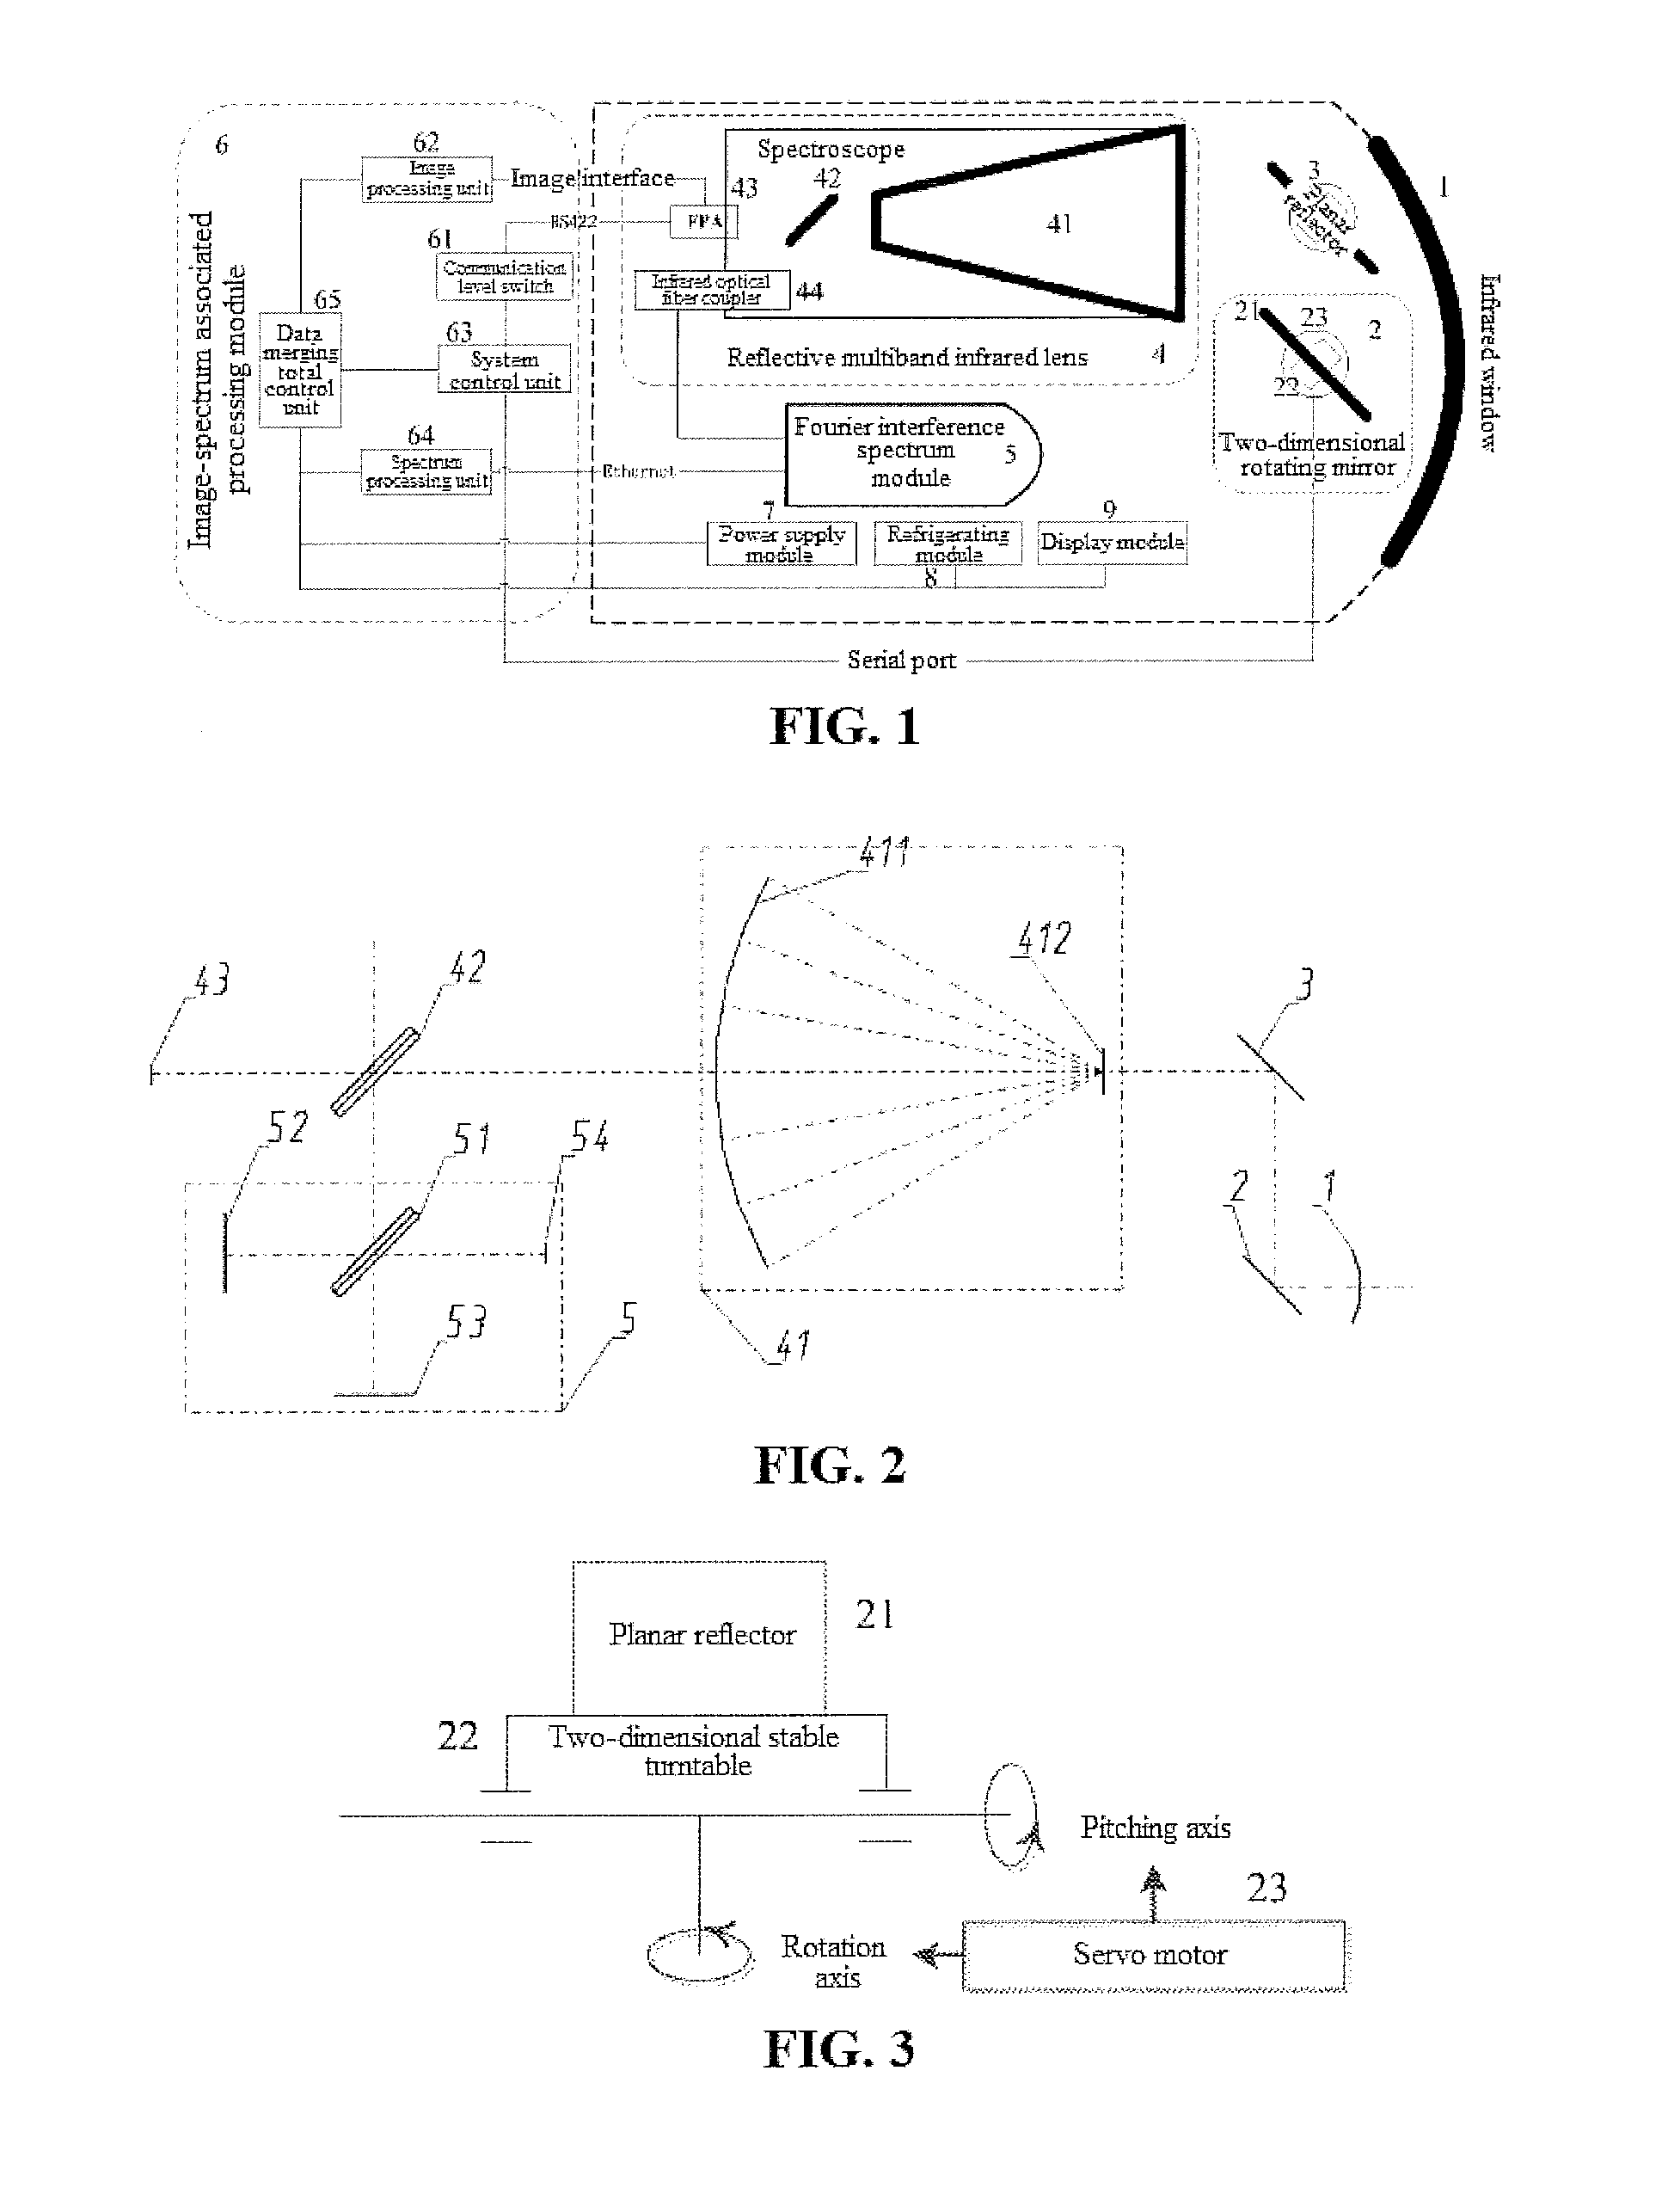 Multiband common-optical-path image-spectrum associated remote sensing measurement system and method